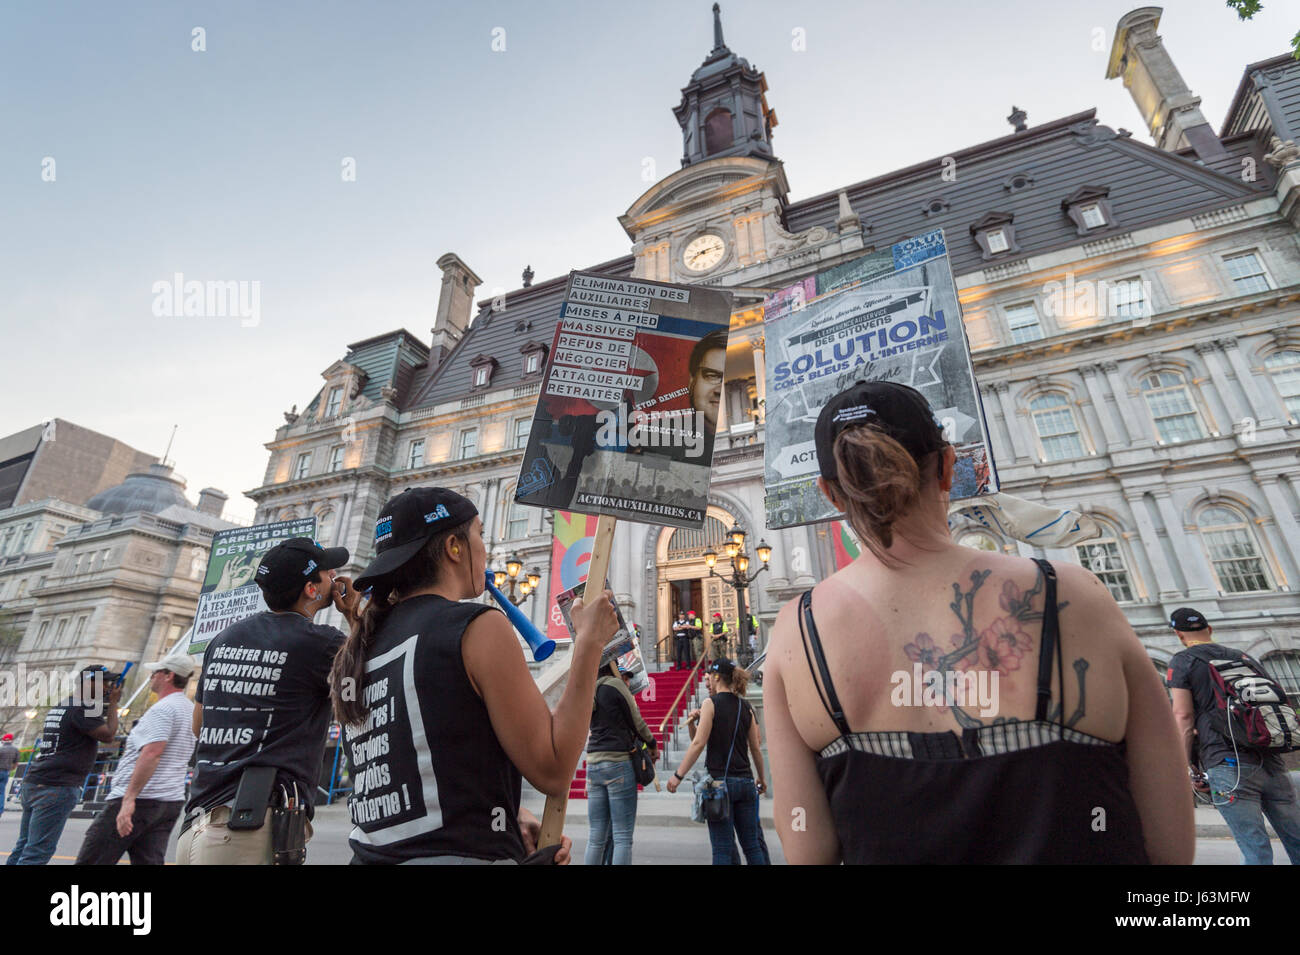 Montreal, Canada. 17th May, 2017. Blue collars protest in front of city hall Credit: Marc Bruxelle/Alamy Live News Stock Photo